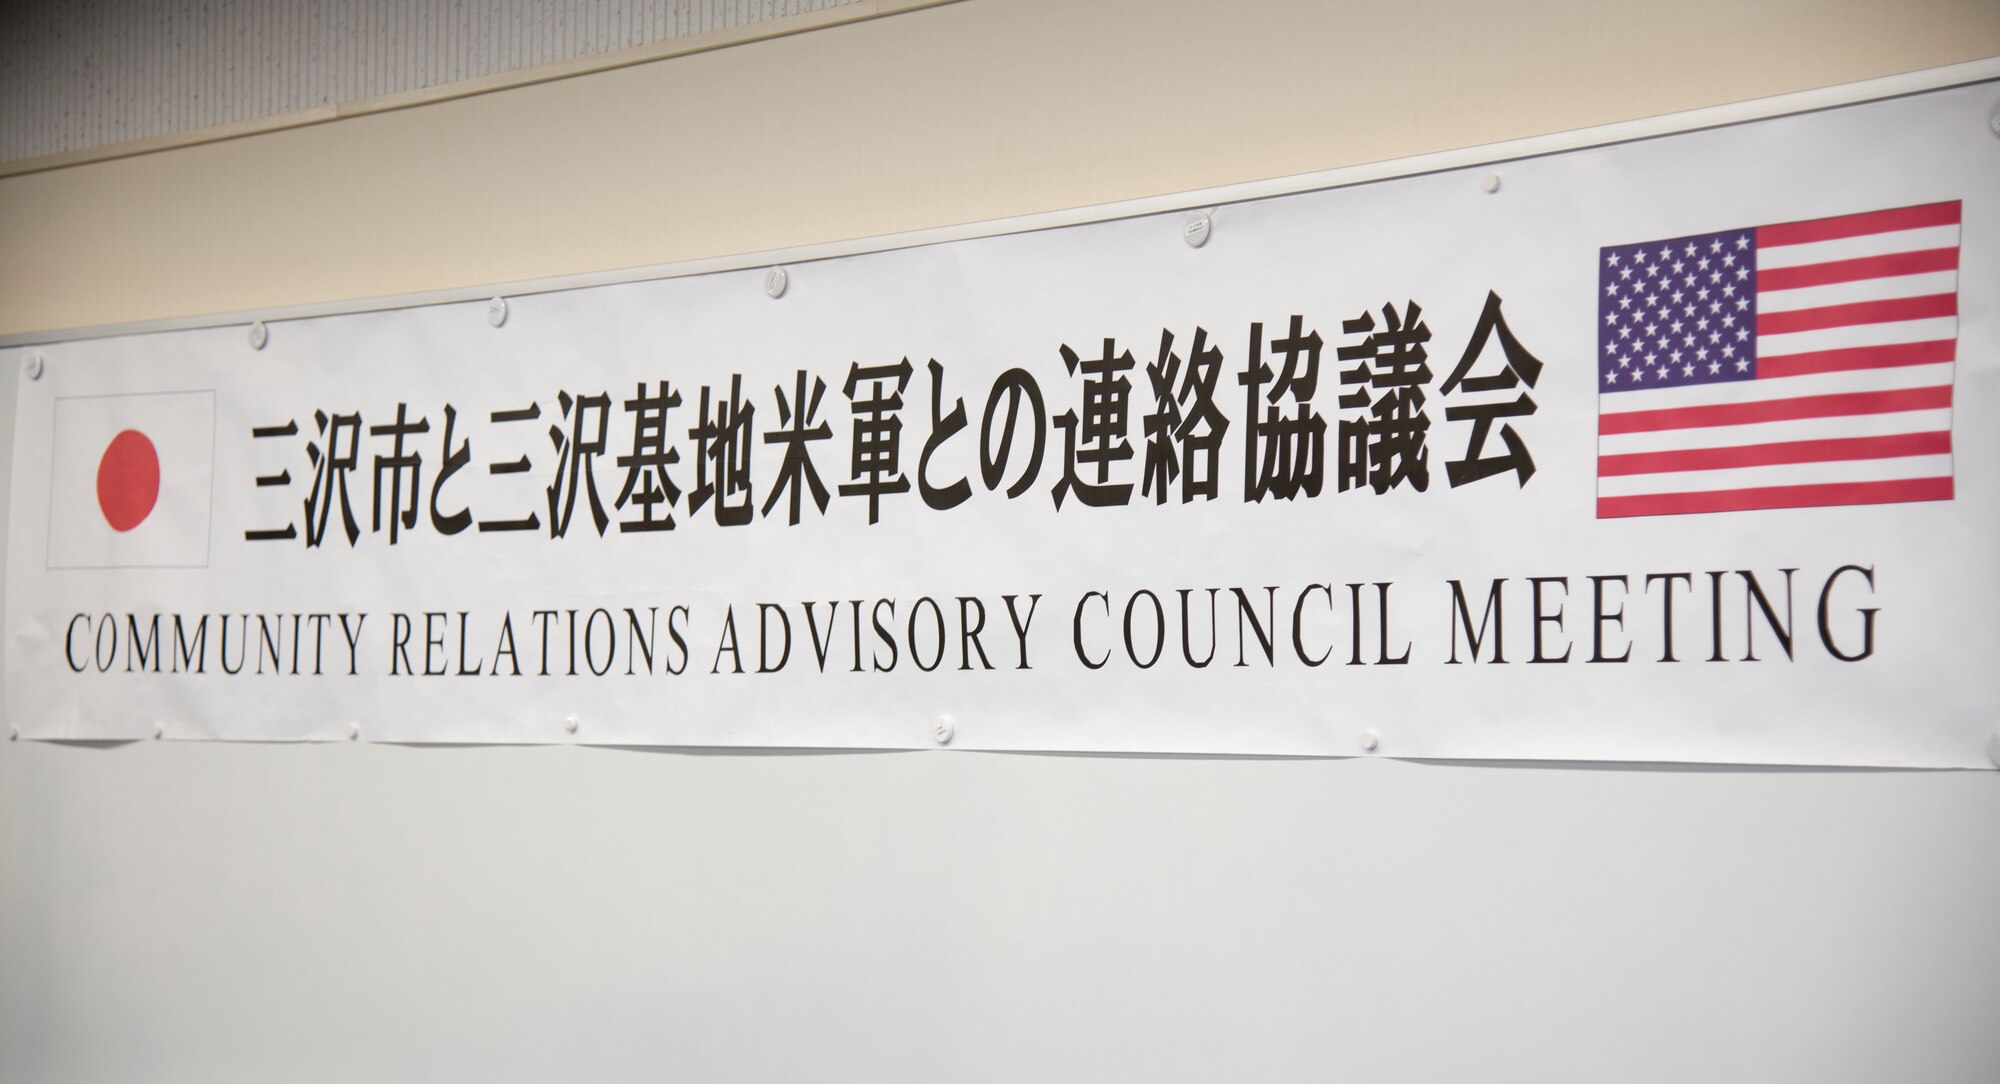 An official banner lines the back wall of the Community Relations Advisory Council meeting at the Misawa International Center, Japan, Feb. 5, 2019. The banner bears the flags of both the U.S. and Japan, indicating the strong unity of purpose among the two nations. (U.S. Air Force photo by Branden Yamada)